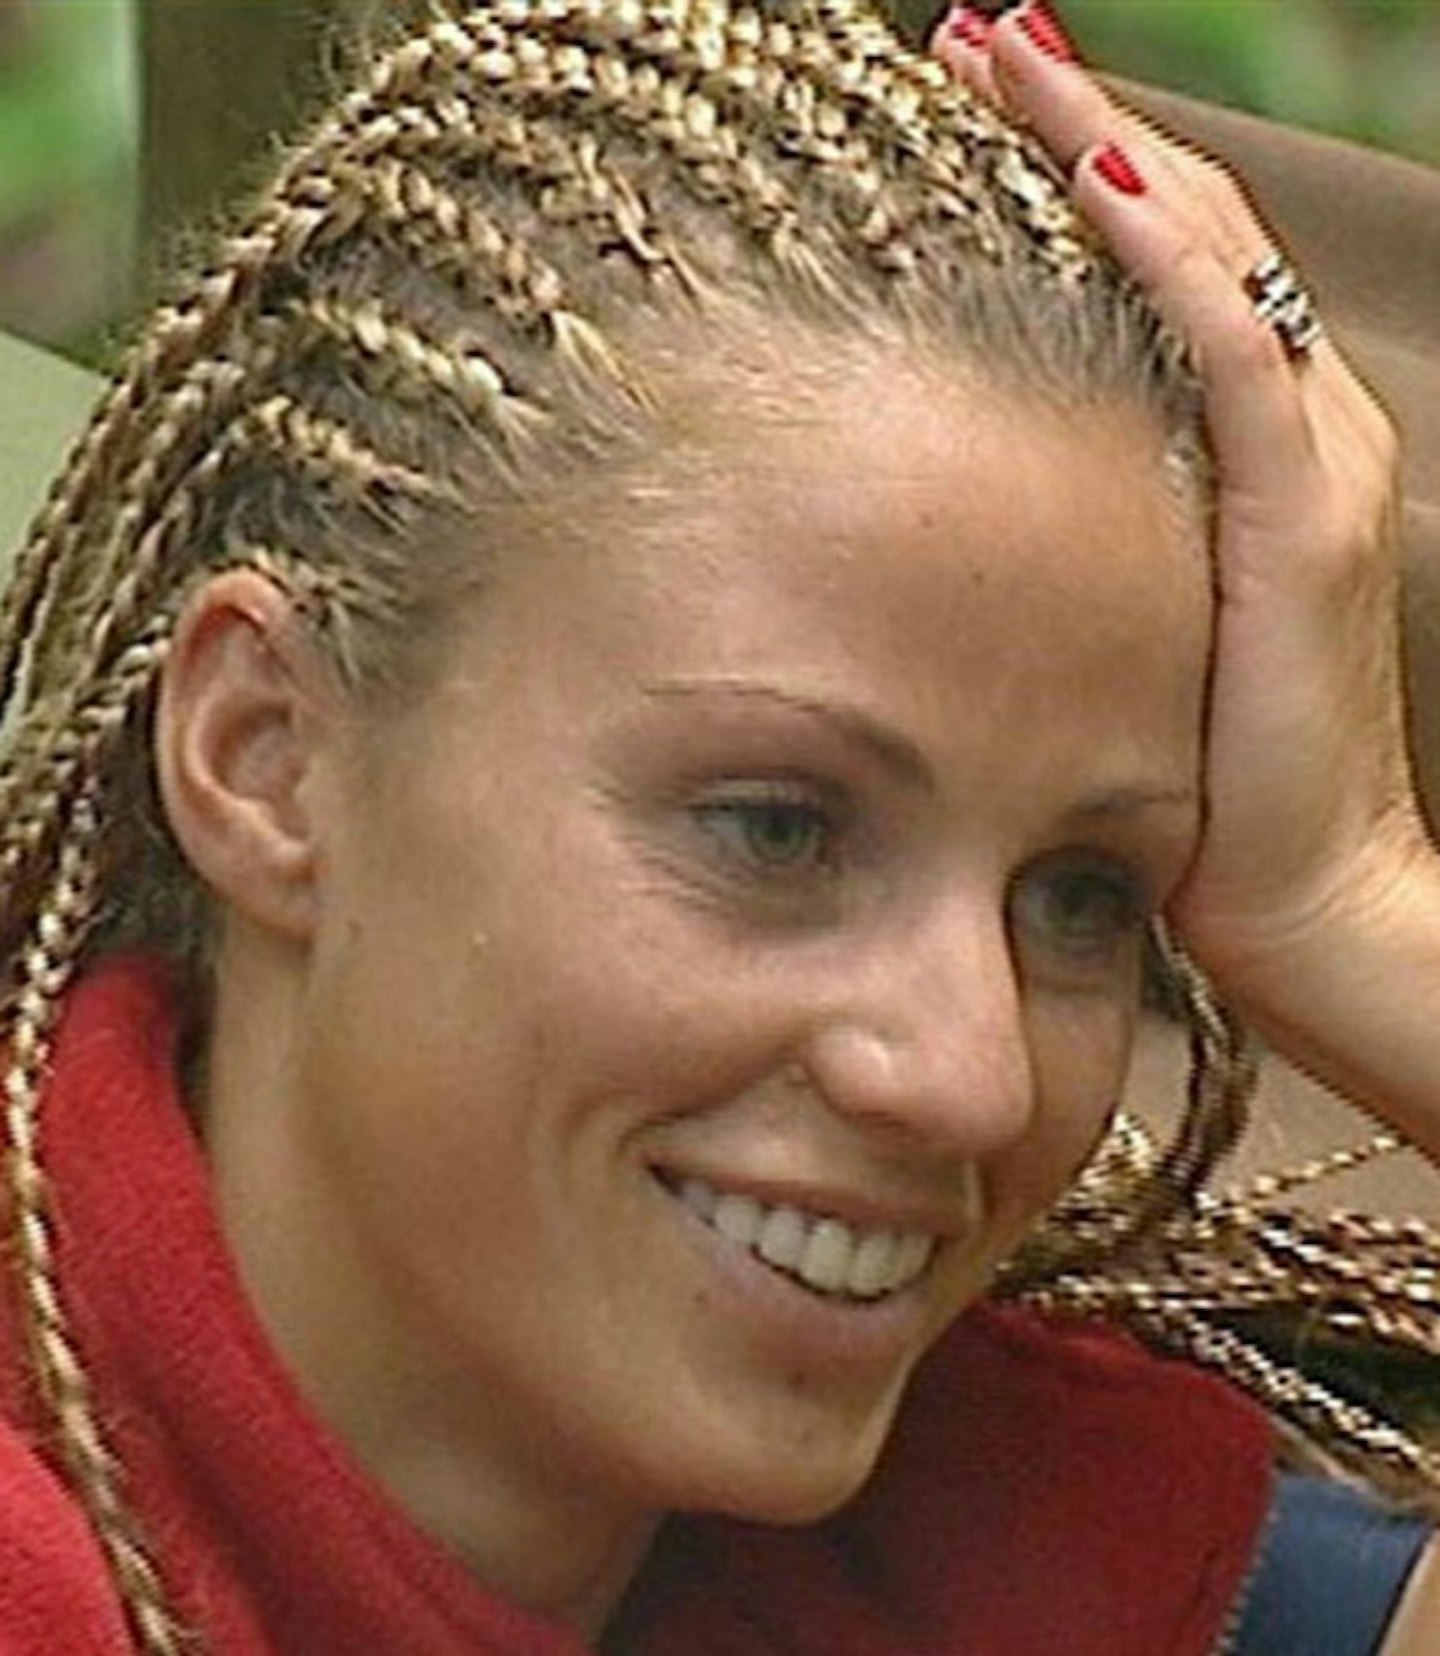 January 2004 - I'm A Celebrity... Get Me Out Of Here!